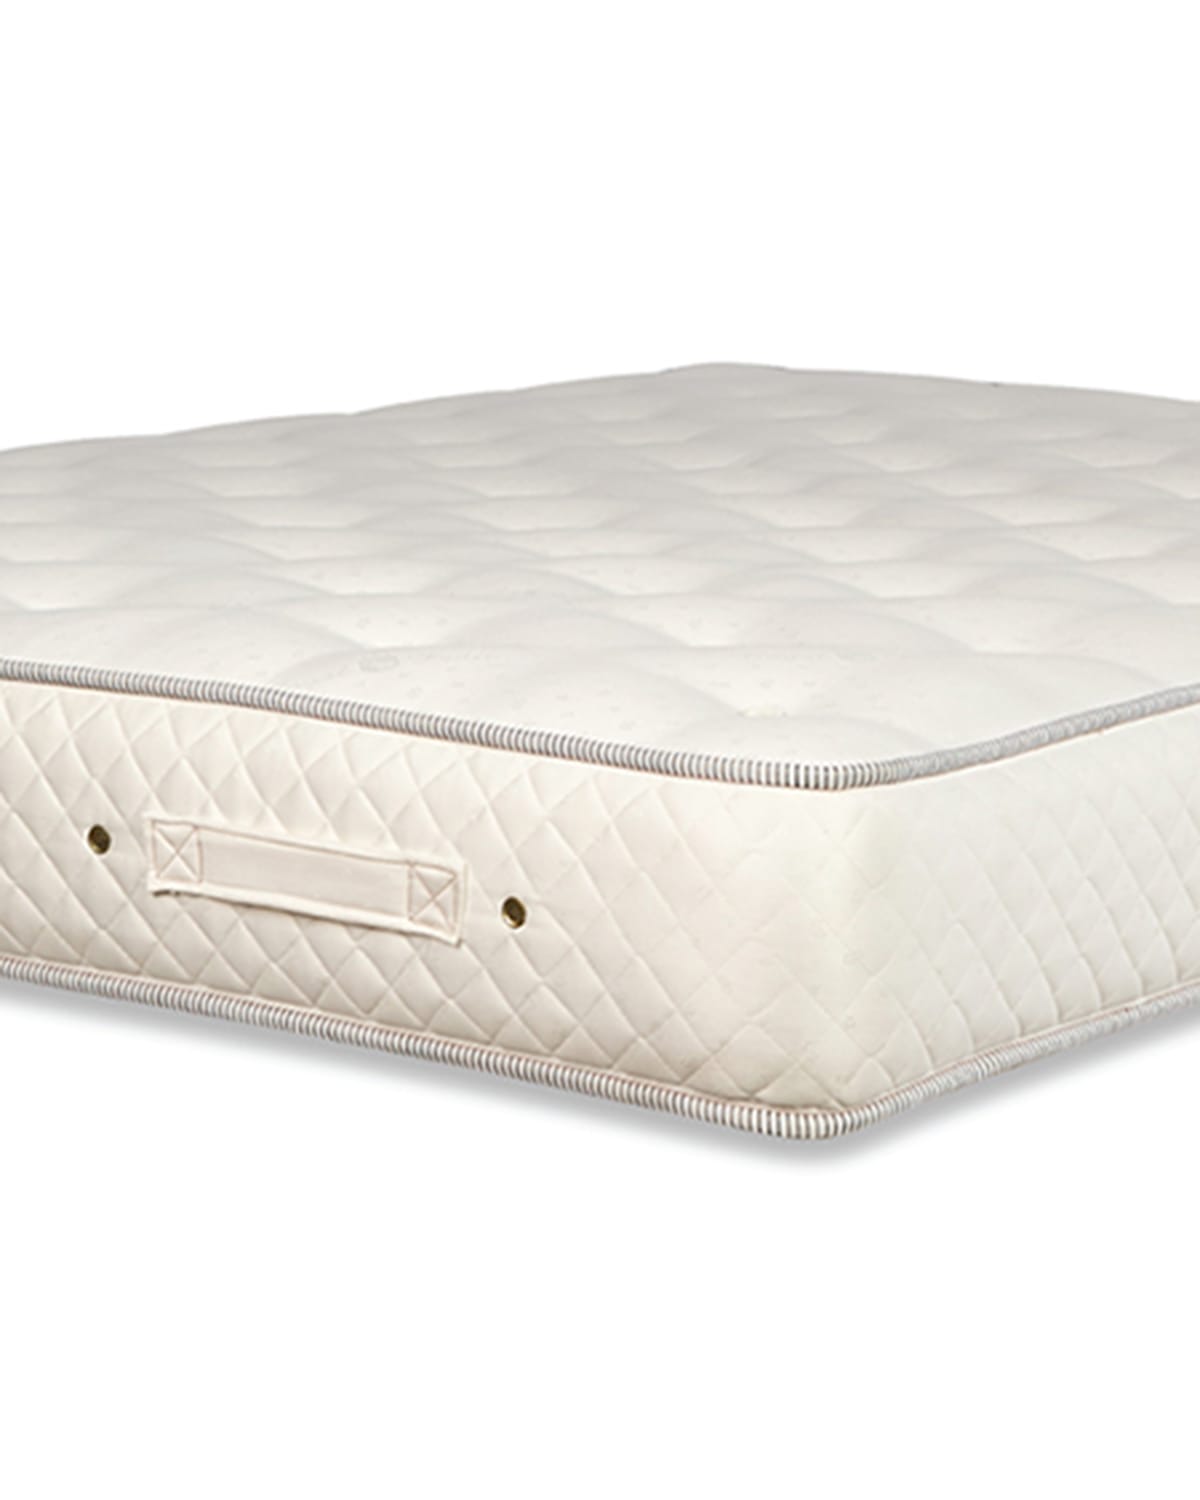 Royal-pedic Dream Spring Limited Firm King Mattress In White